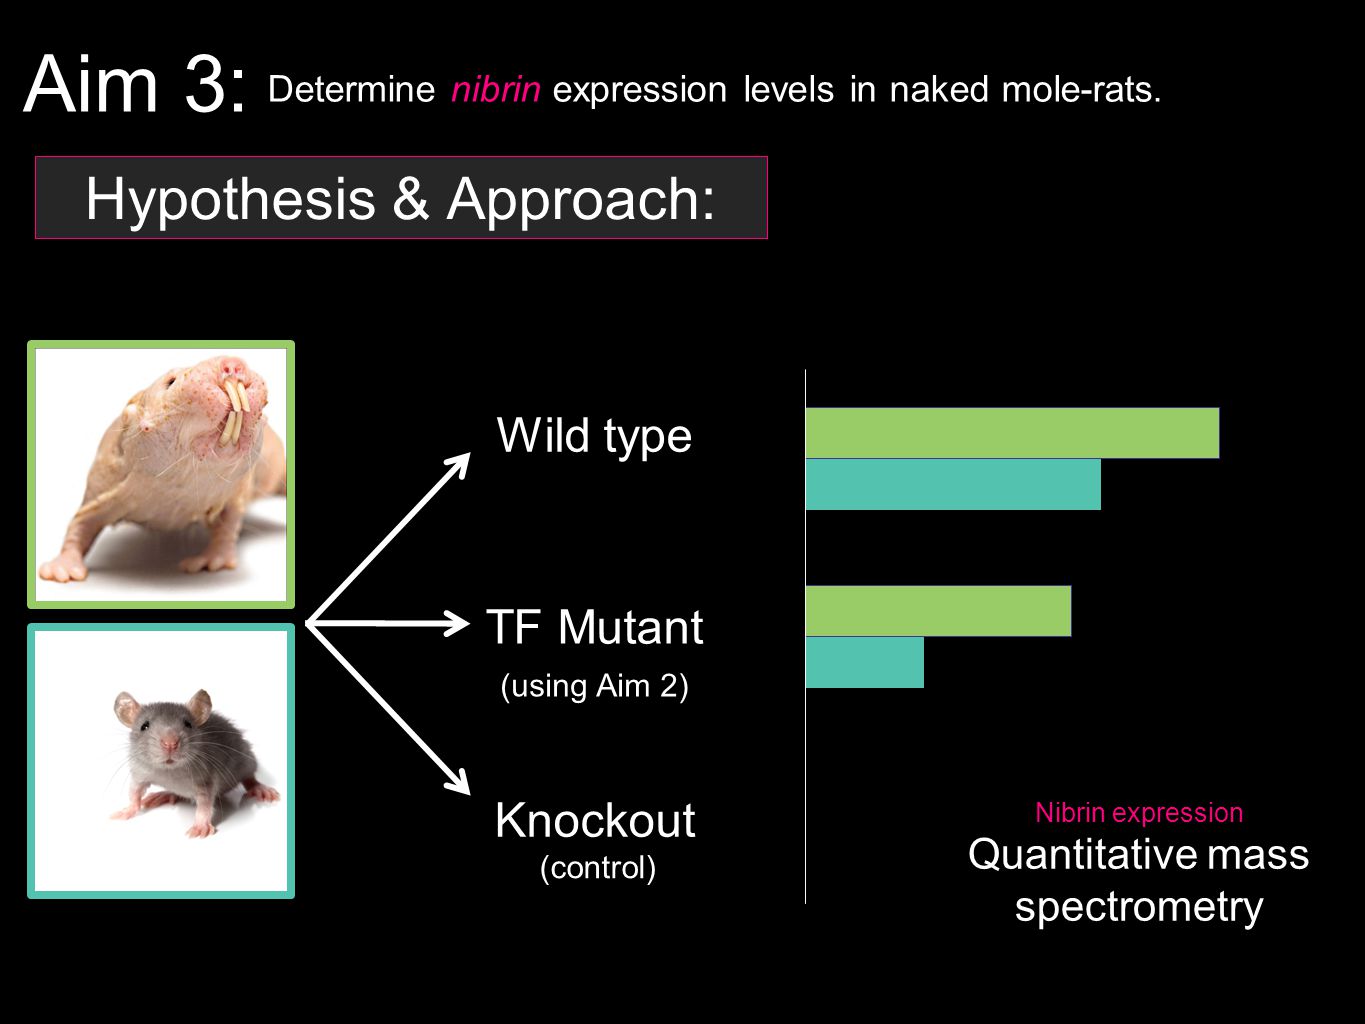 Aim 3: Determine nibrin expression levels in naked mole-rats.